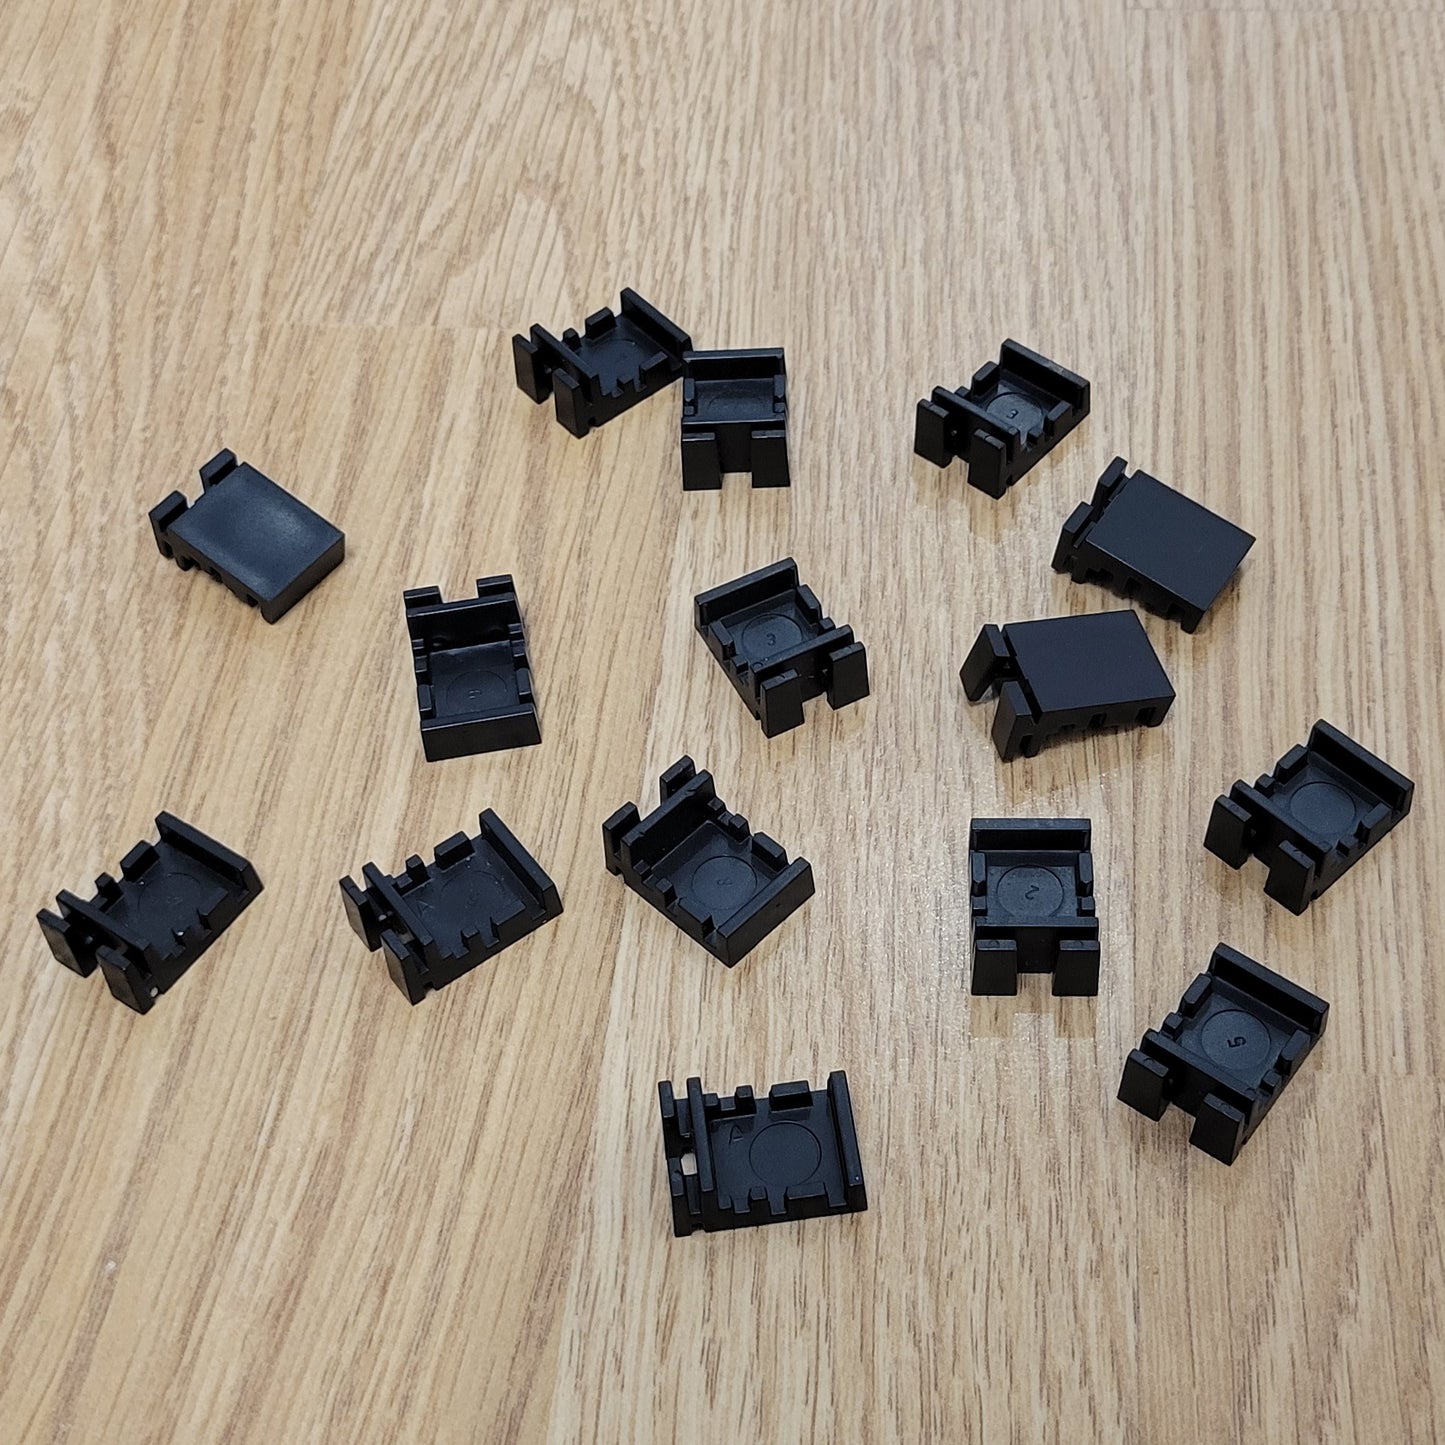 Scalextric 1:32 Sport Track C8212 Barrier Clips x 15 - Action Slot Racing